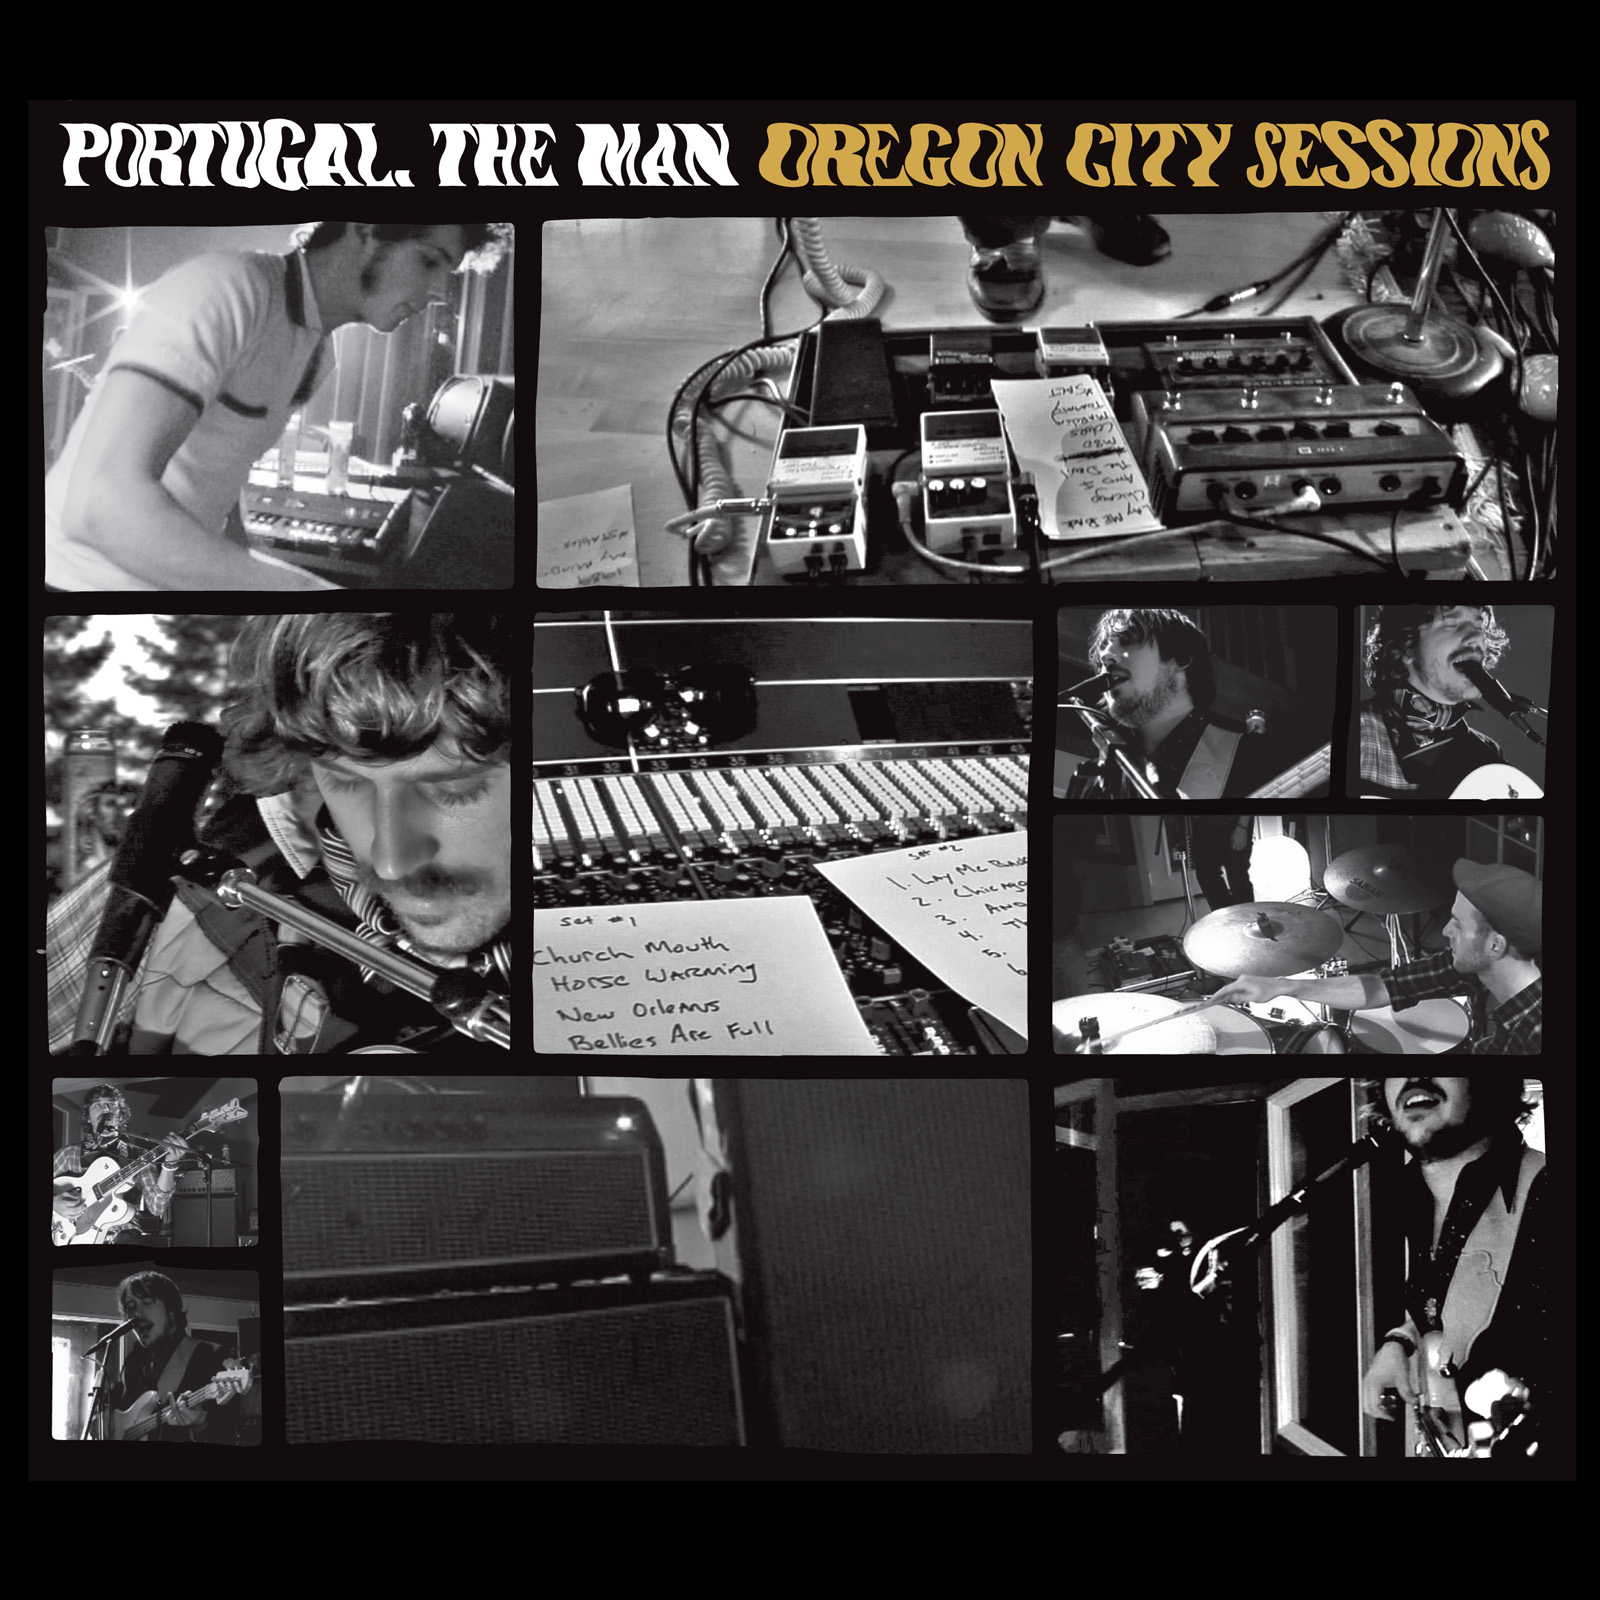 Portugal. The Man - Oregon City Sessions - 2xCD